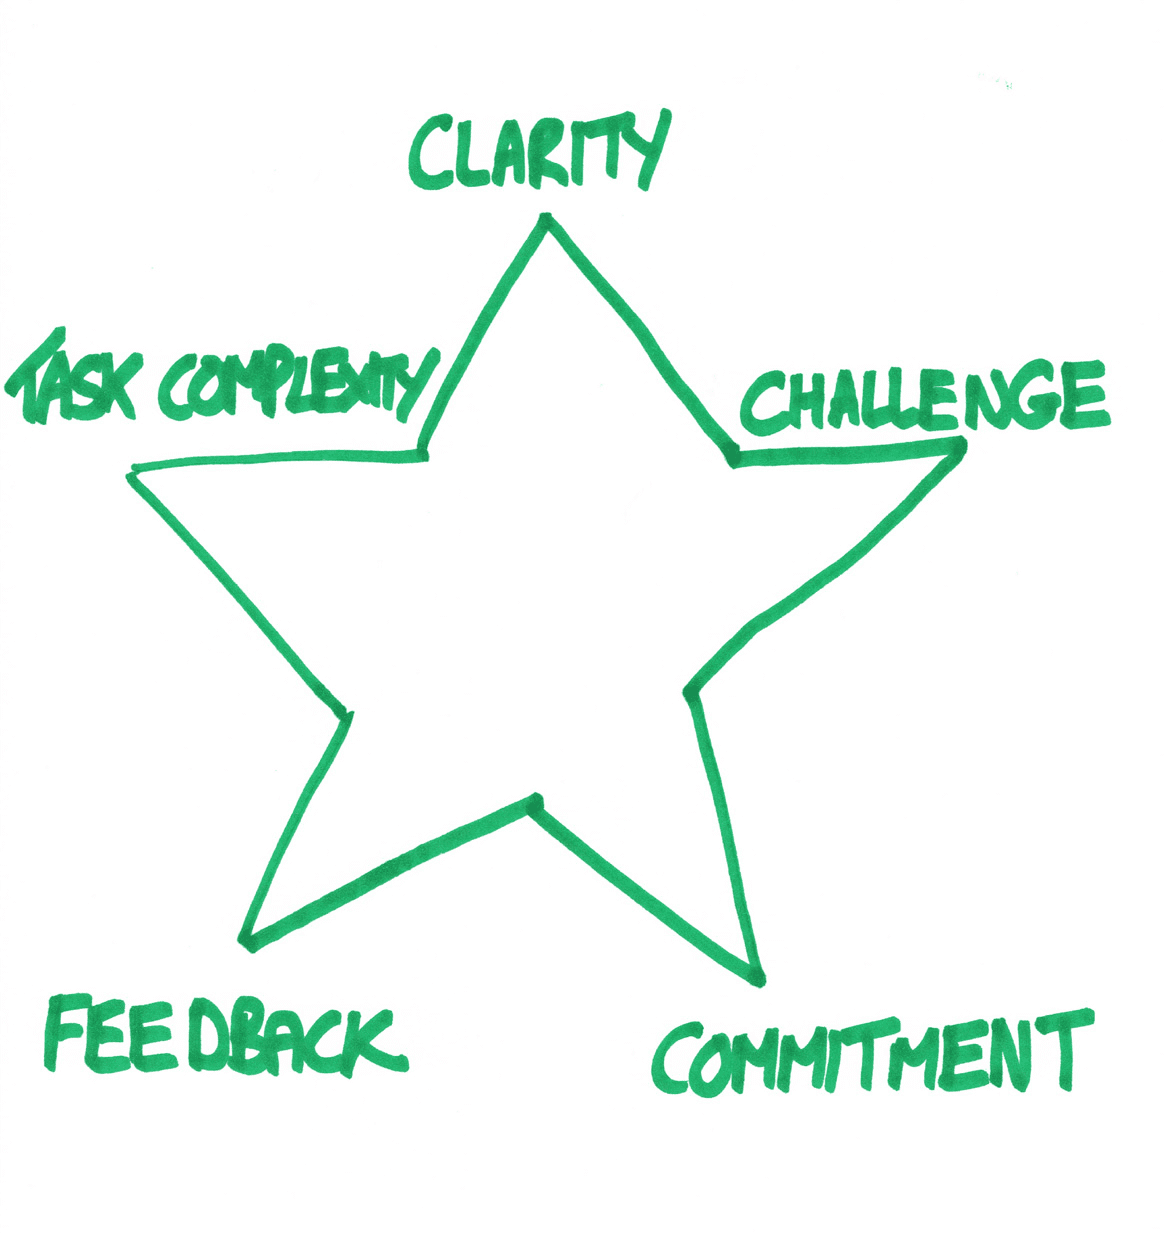 Green star drawing labeled Clarity, Challenge, Commitment, Feedback, Task Complexity on each point